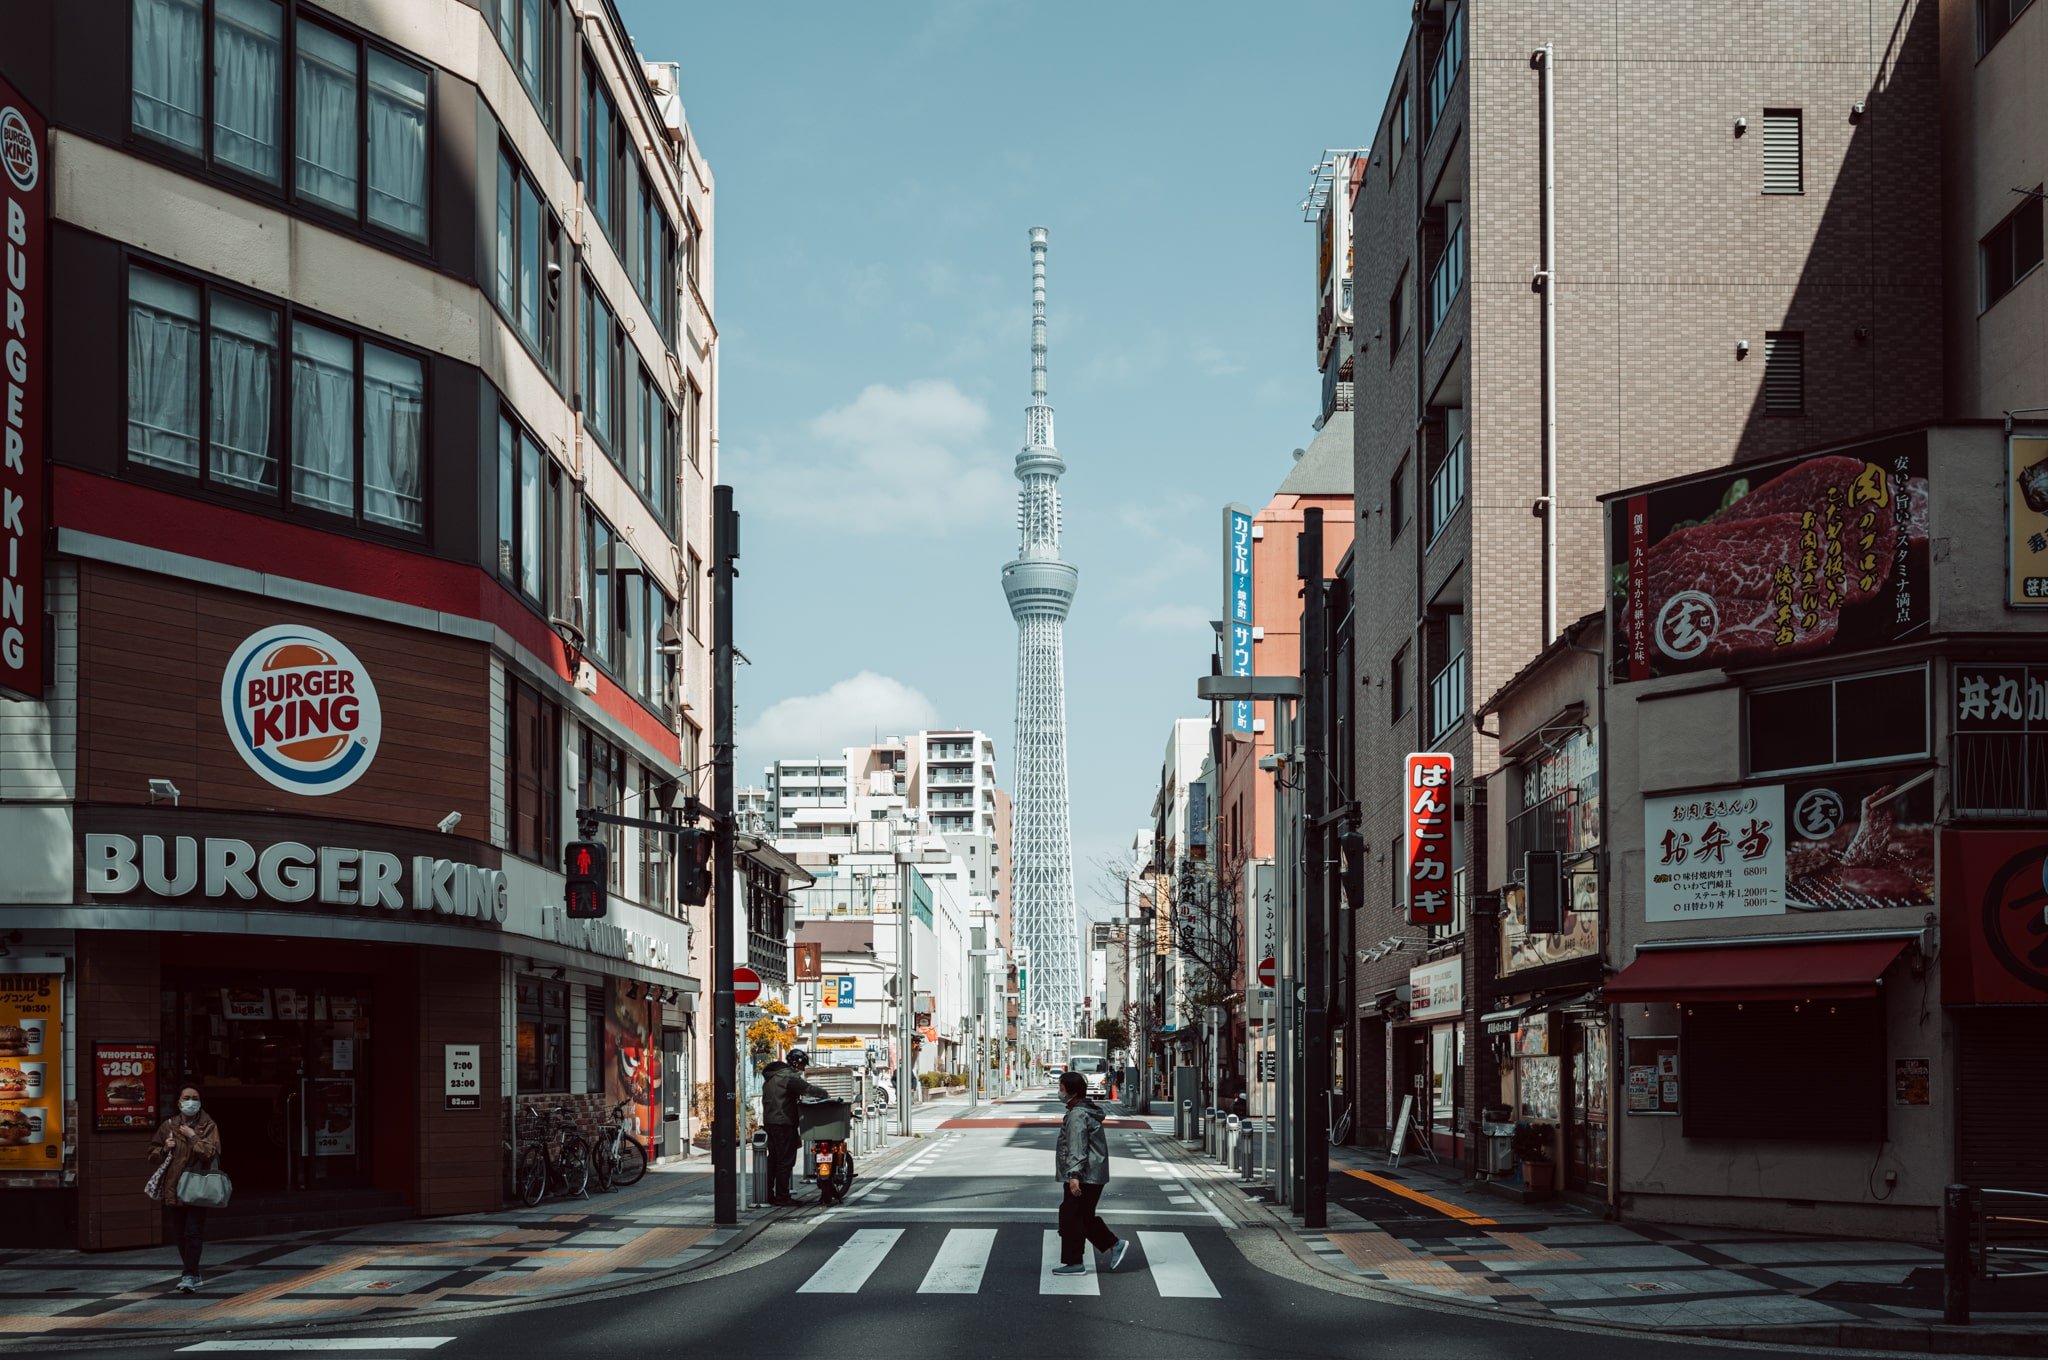 Photo of the Tokyo Sky Tree taken on the Leica M11 with the Zeiss 28mm f2.8